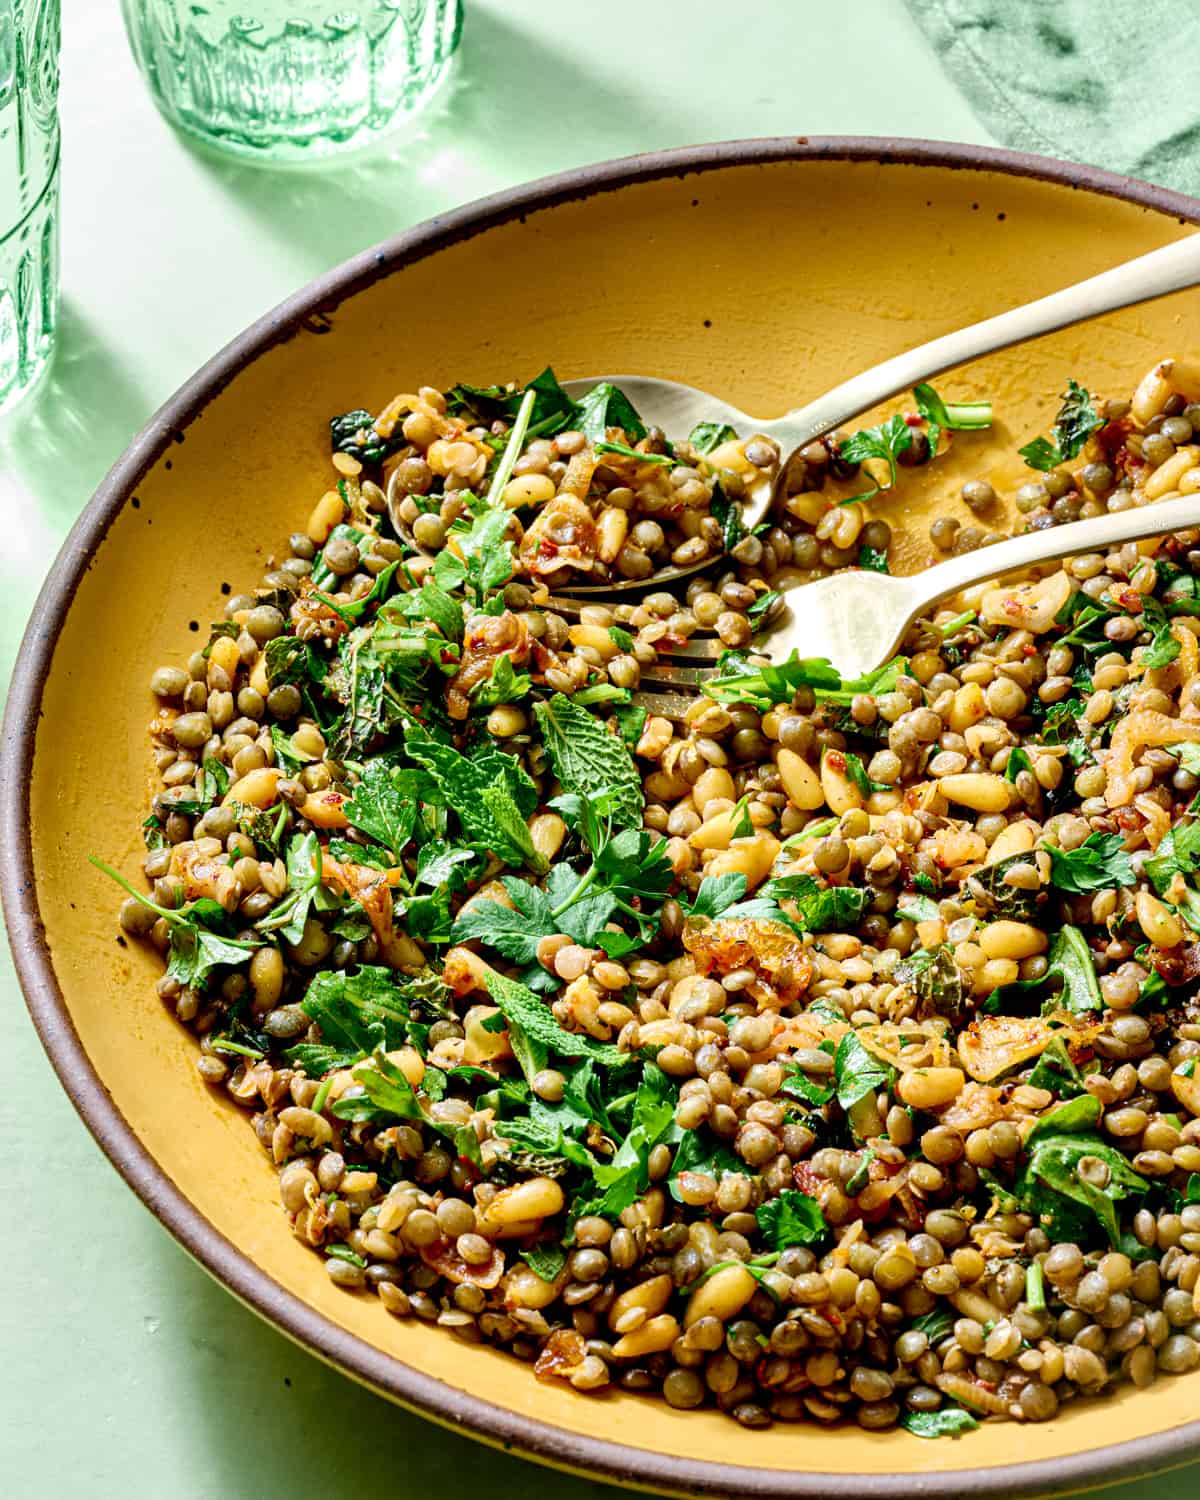 Close up of lentil salad with herbs in yellow bowl.